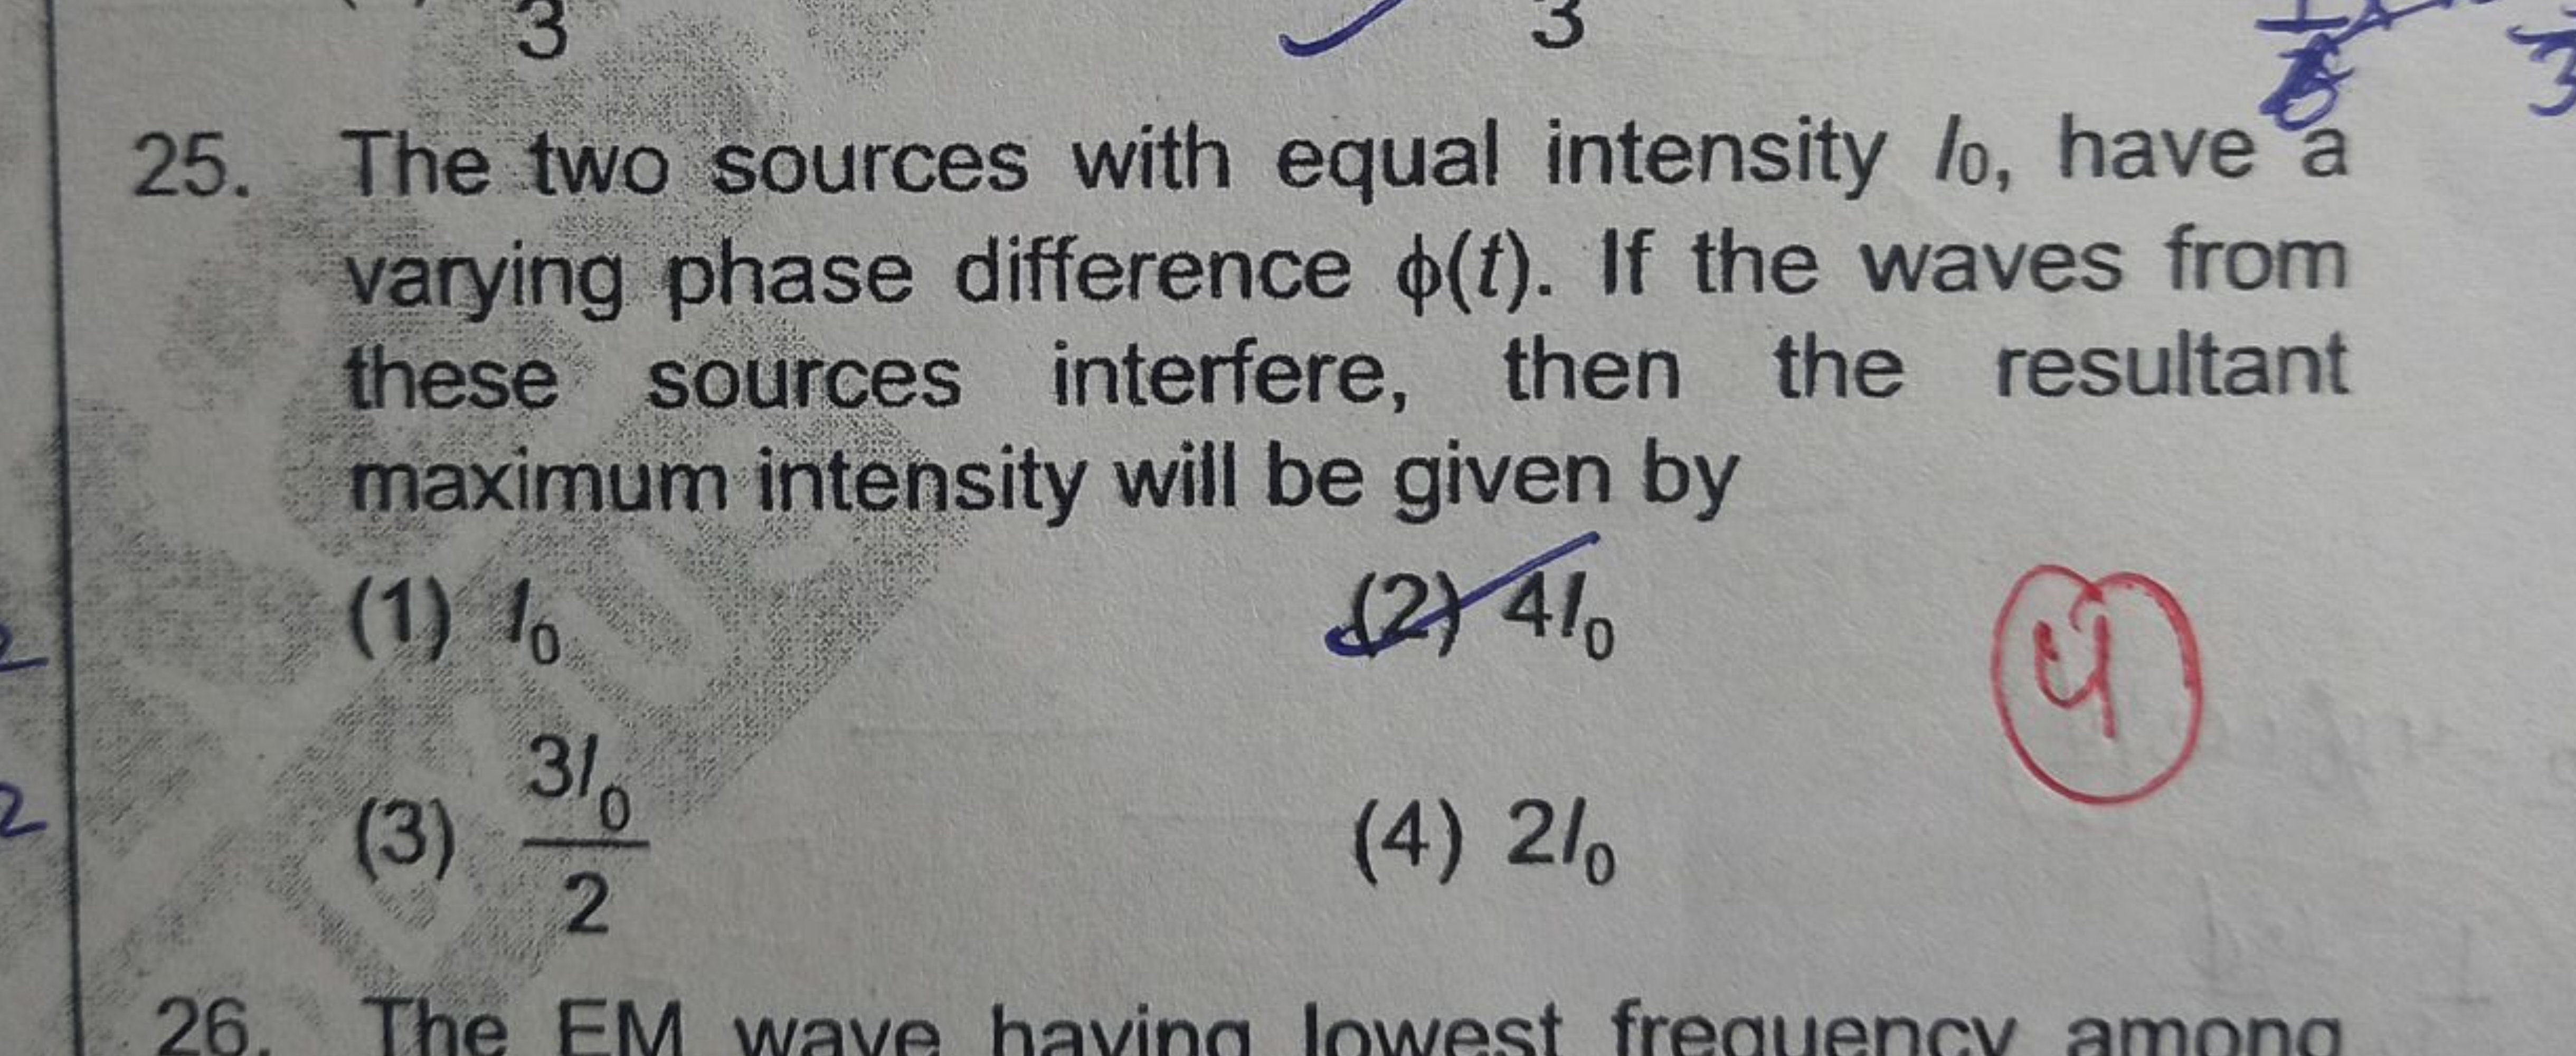 25. The two sources with equal intensity l, have varying phase differe